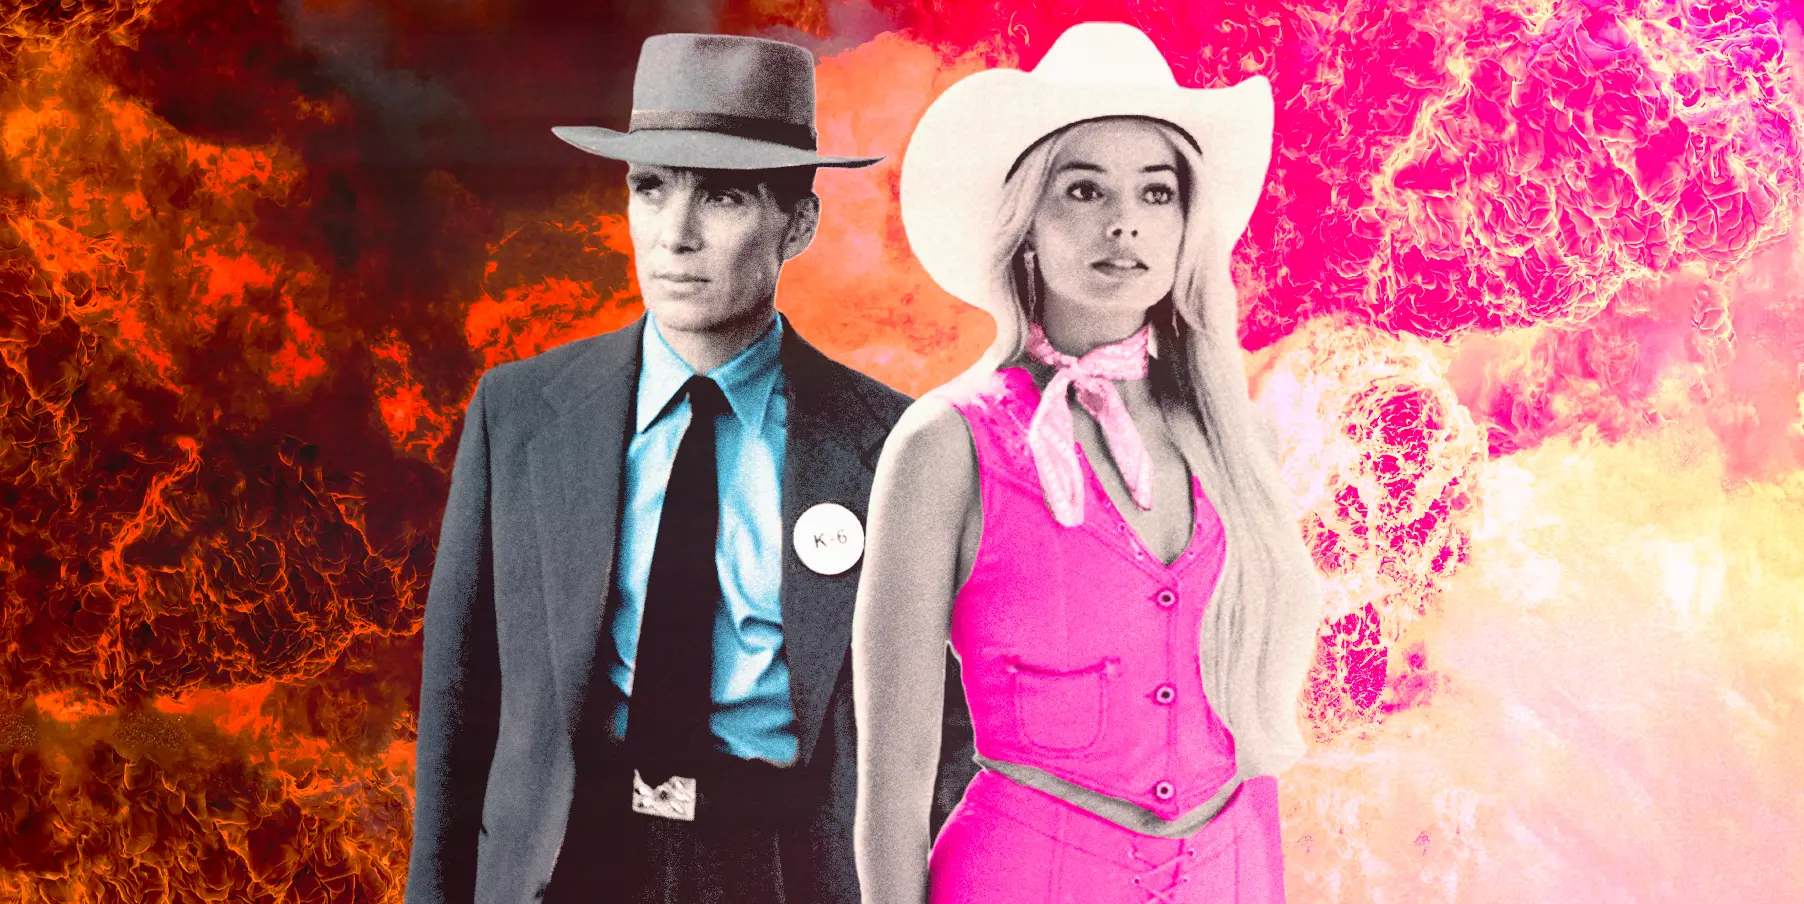 J. Robert Oppenheimer (played by Cillian Murphy) and Barbie (played by Margot Robbie) standing in front of a red and pink explosion, with the duo often being refered to as Barbenheimer.